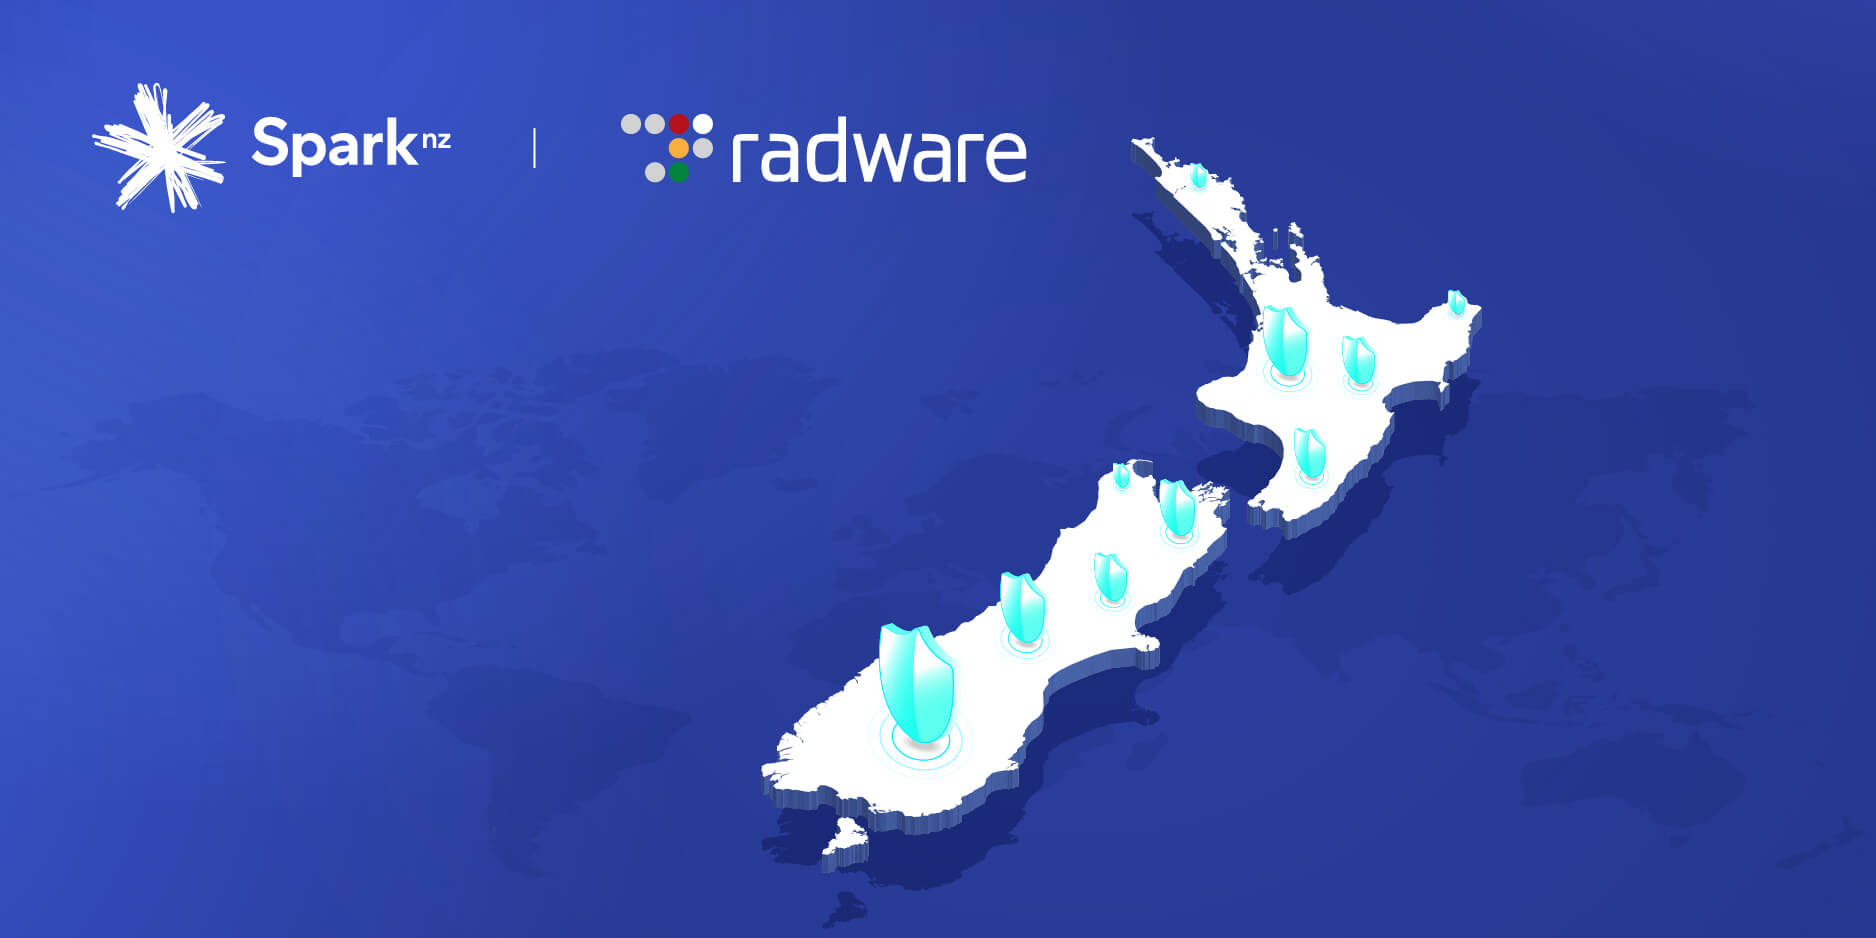 Spark NZ Partners With Radware to Improve Cybersecurity Measures